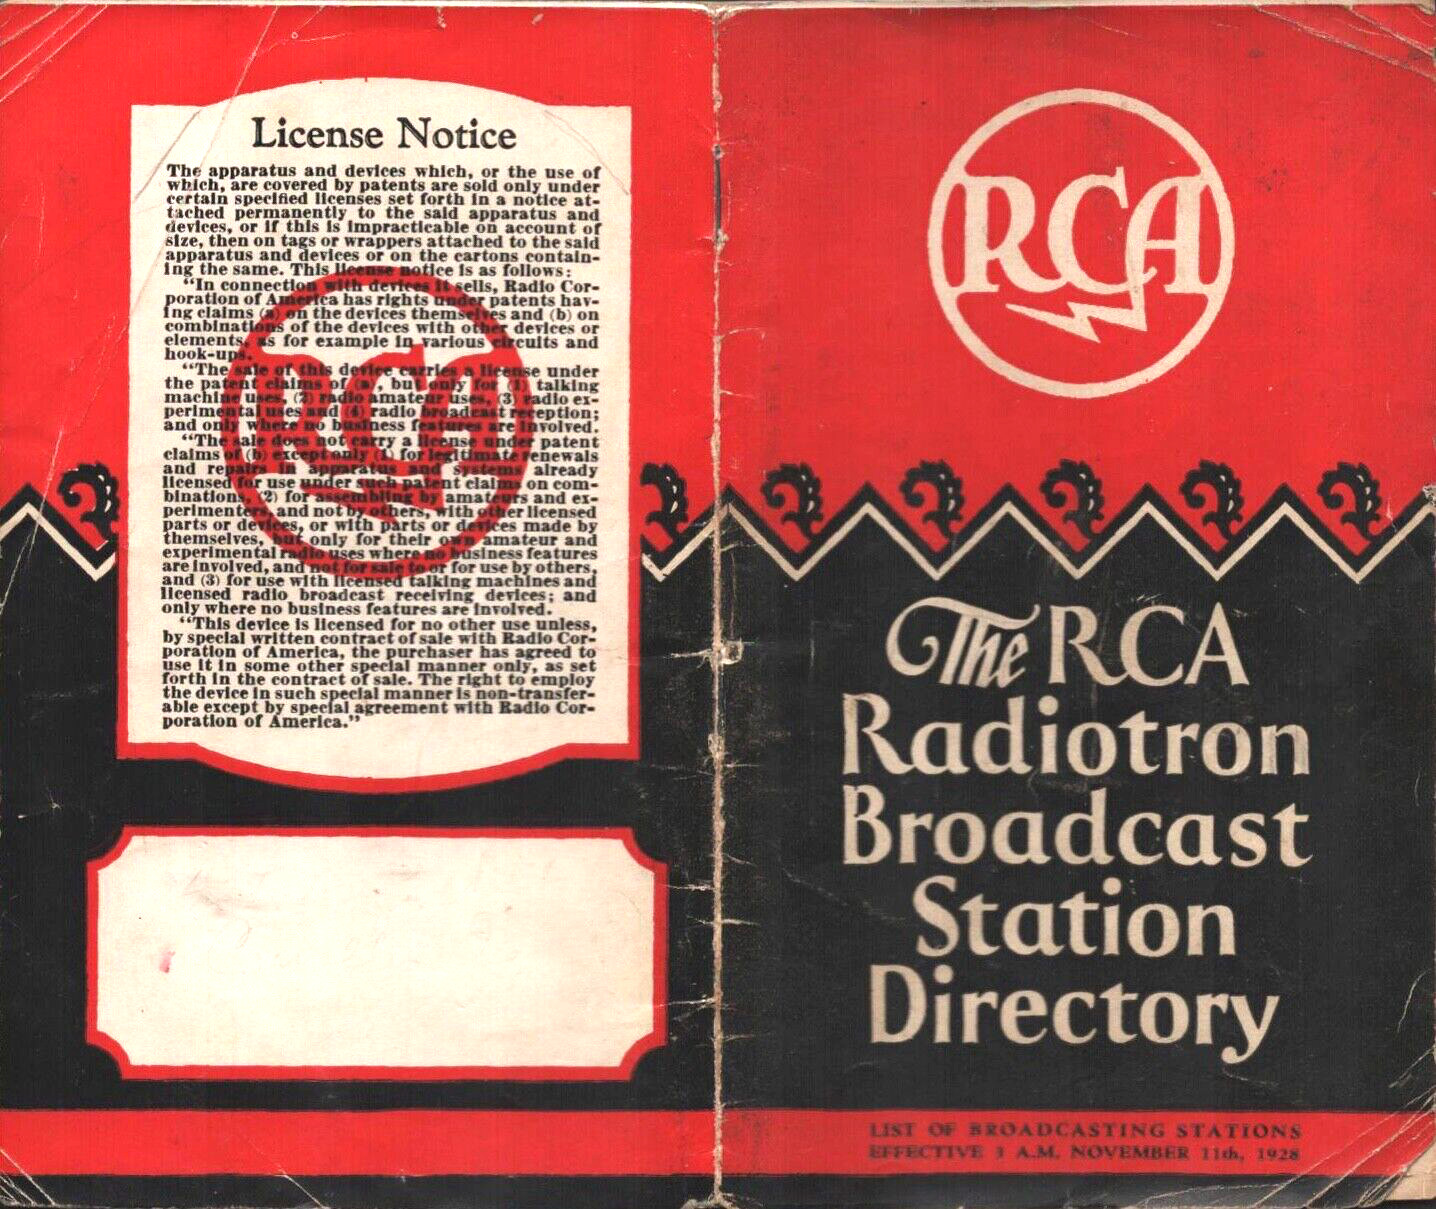 1928 THE RCA RADIOTRON BROADCAST STATION DIRECTORY antique booklet RADIO TUBES